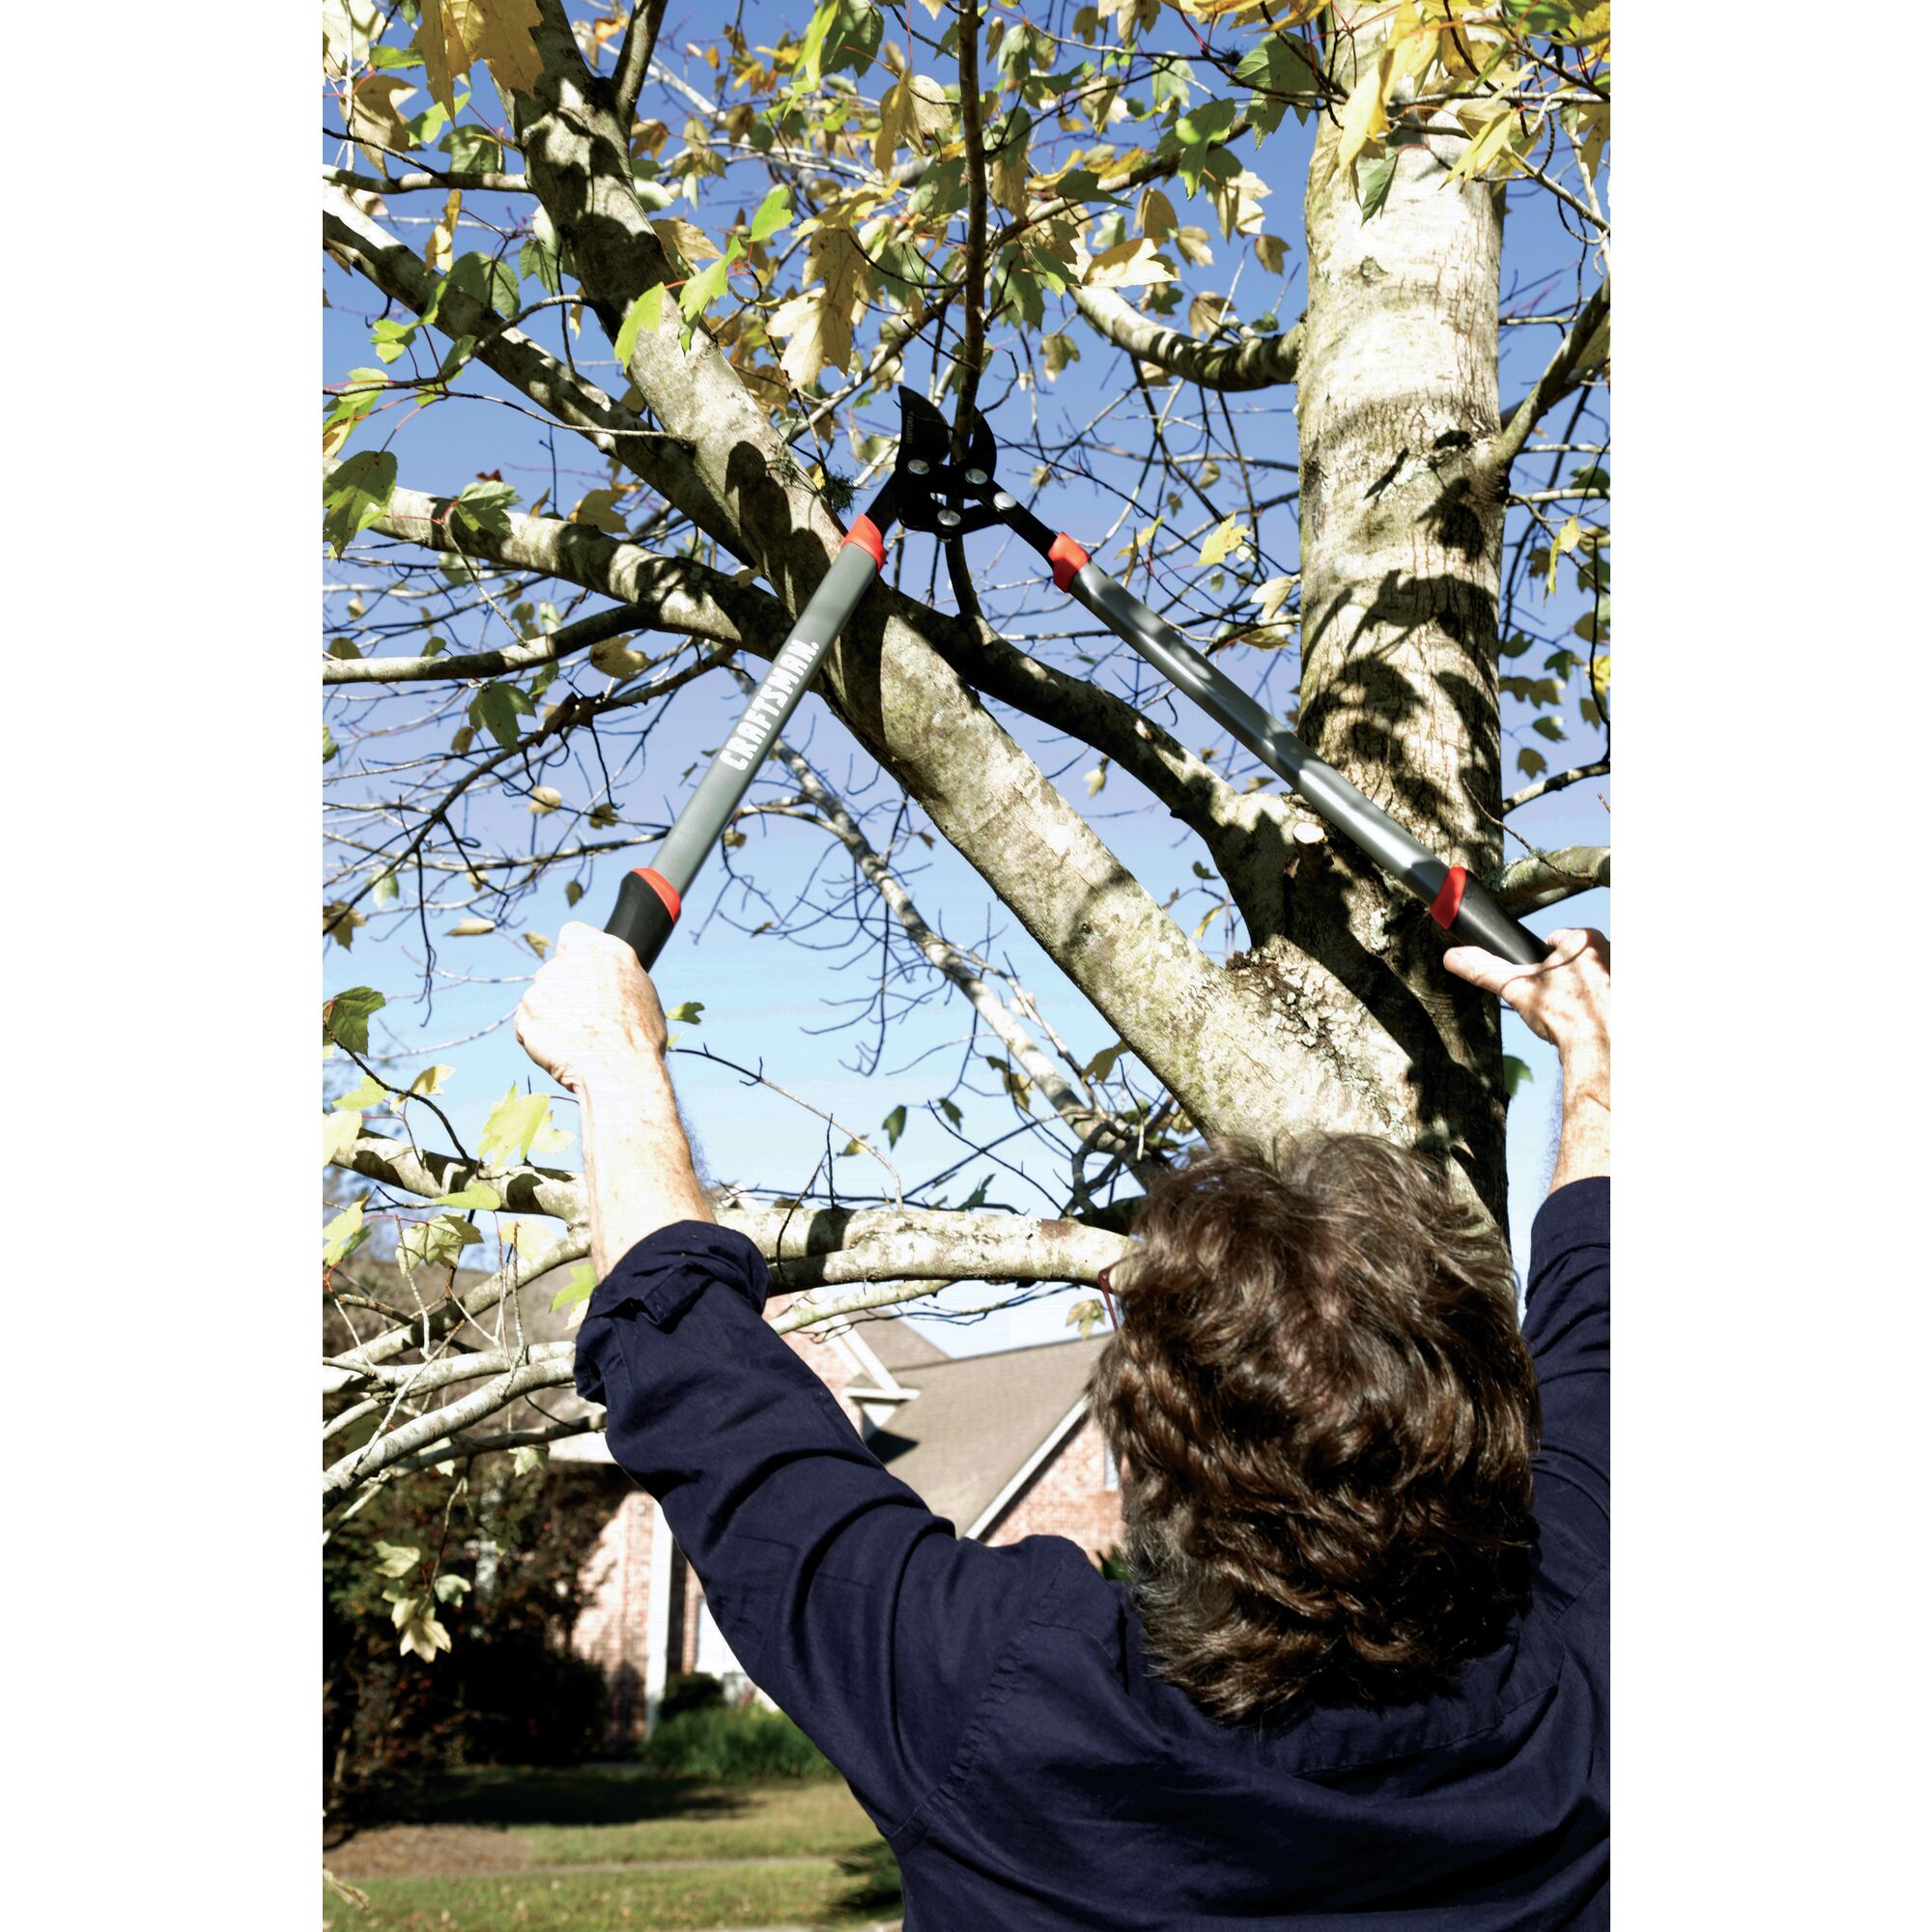 Compound bypass lopper being used by a person to cut a branch.